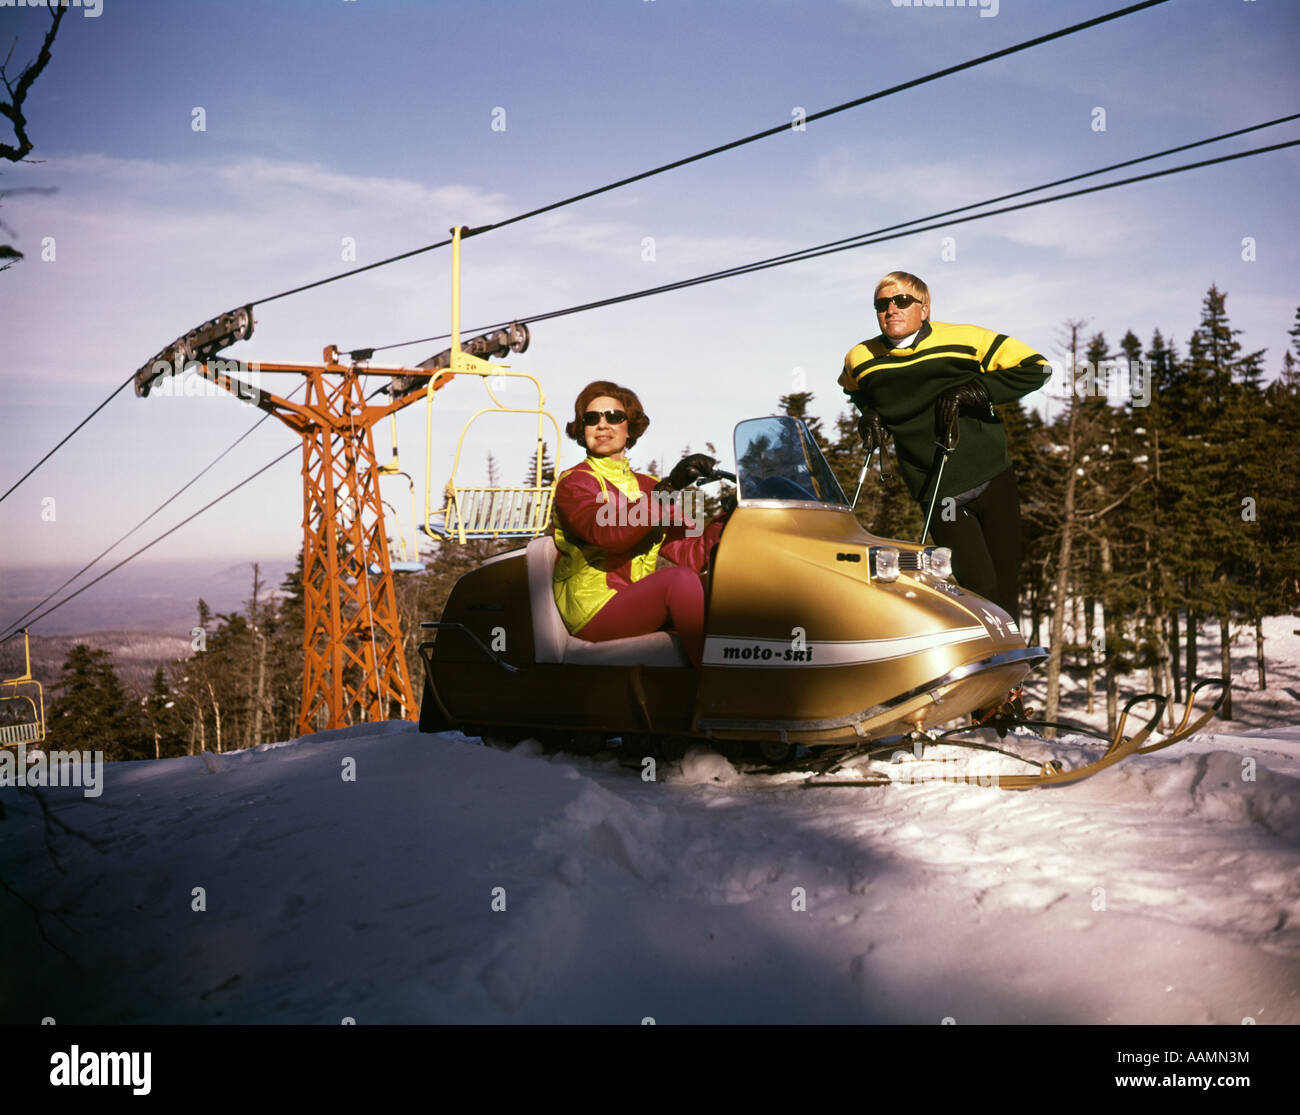 1960s MAN ON SKIS TALKING TO WOMAN IN SNOWMOBILE NEAR SKI LIFT IN MOUNTAINS LIFESTYLE VACATION HOBBY Stock Photo